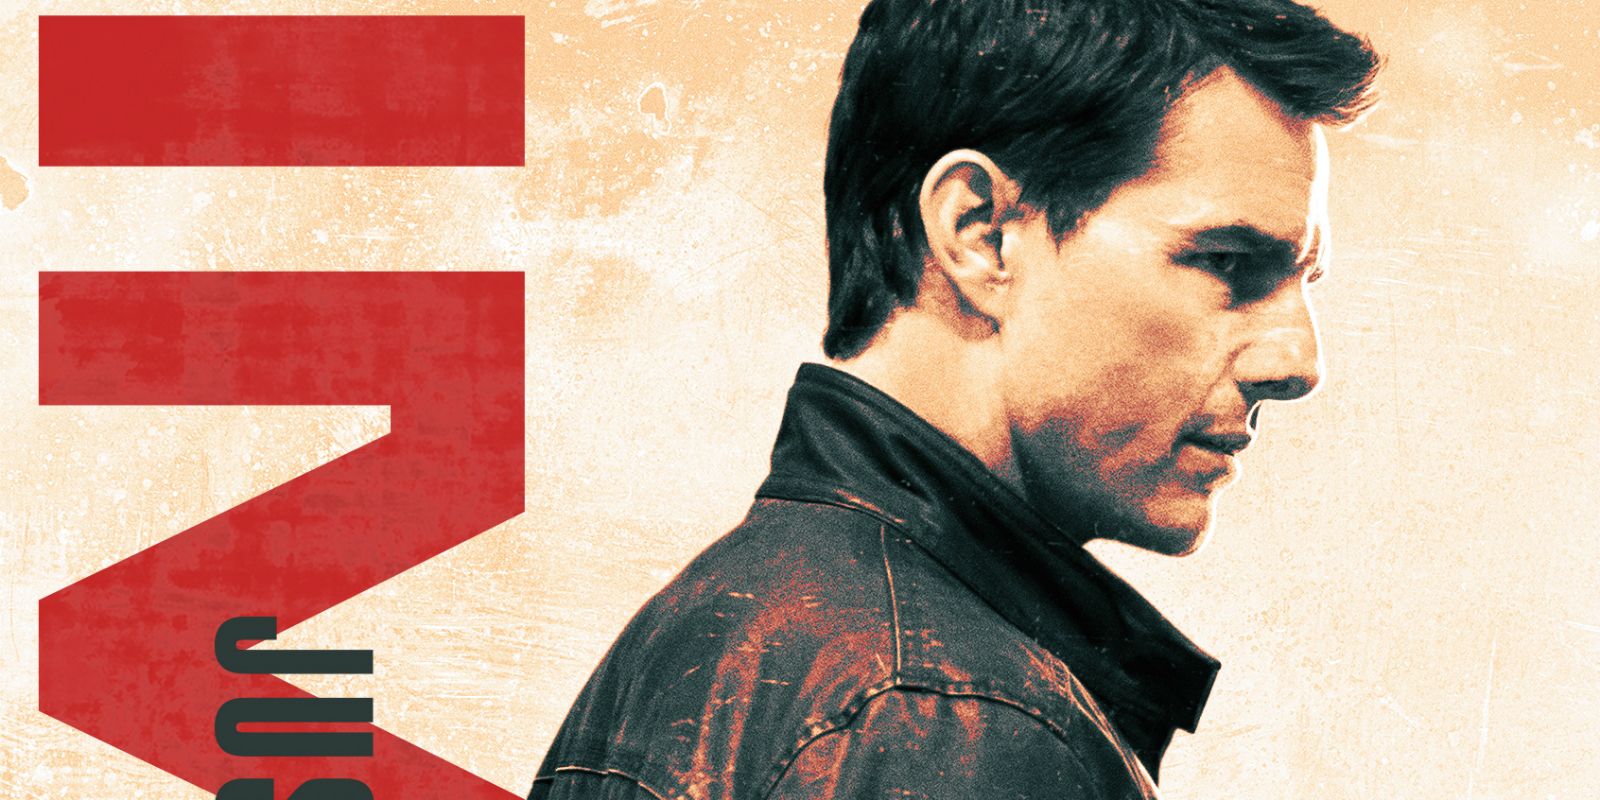 Jack Reacher: Never Go Back IMAX trailer and poster